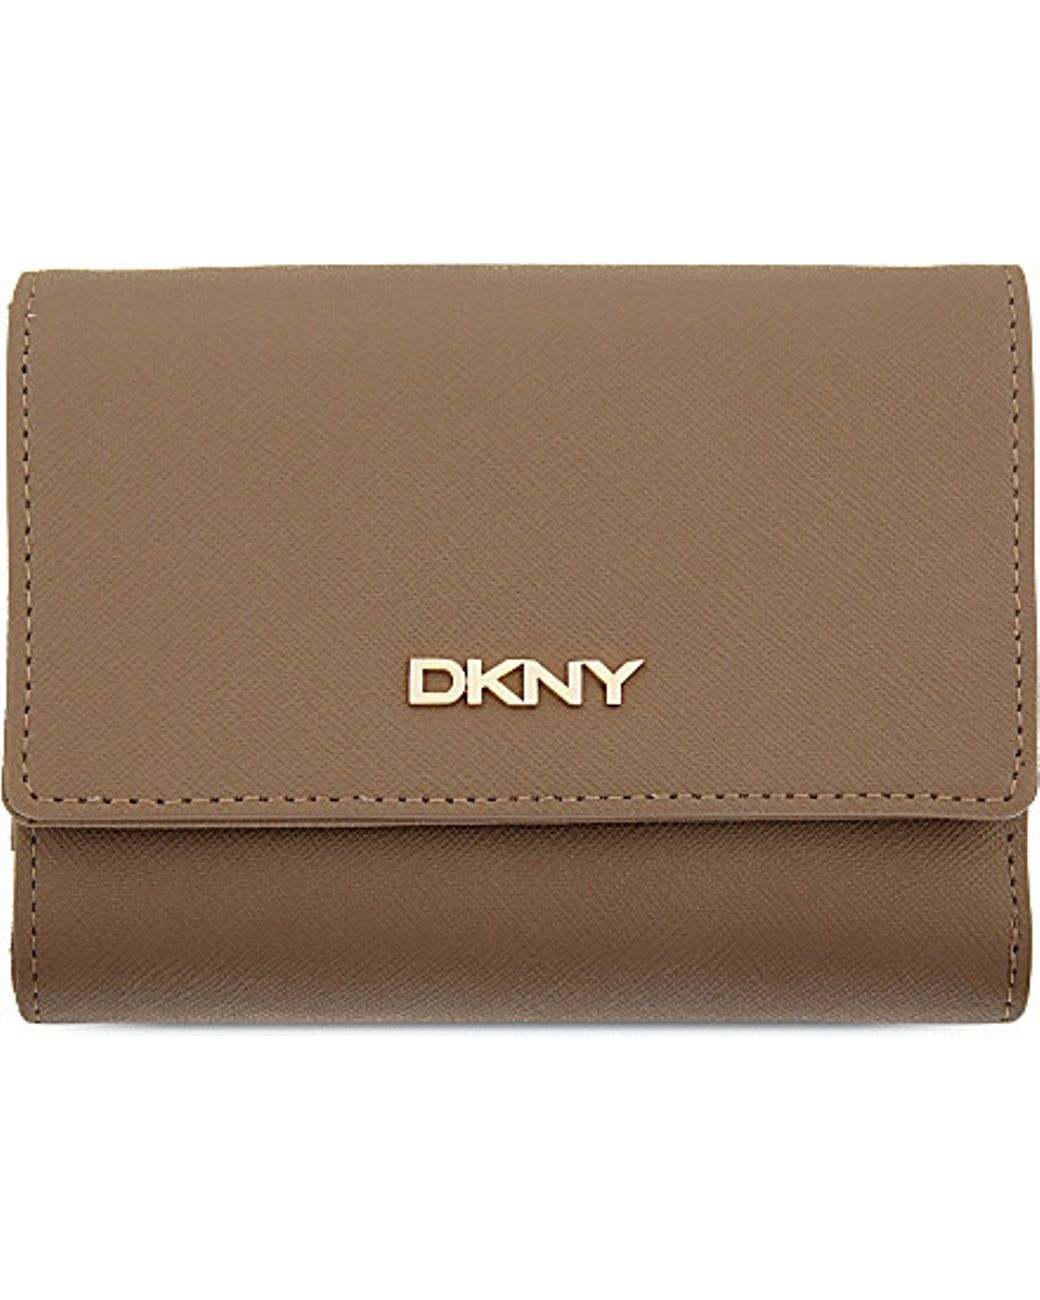 DKNY Small Saffiano Leather Trifold Wallet in Natural